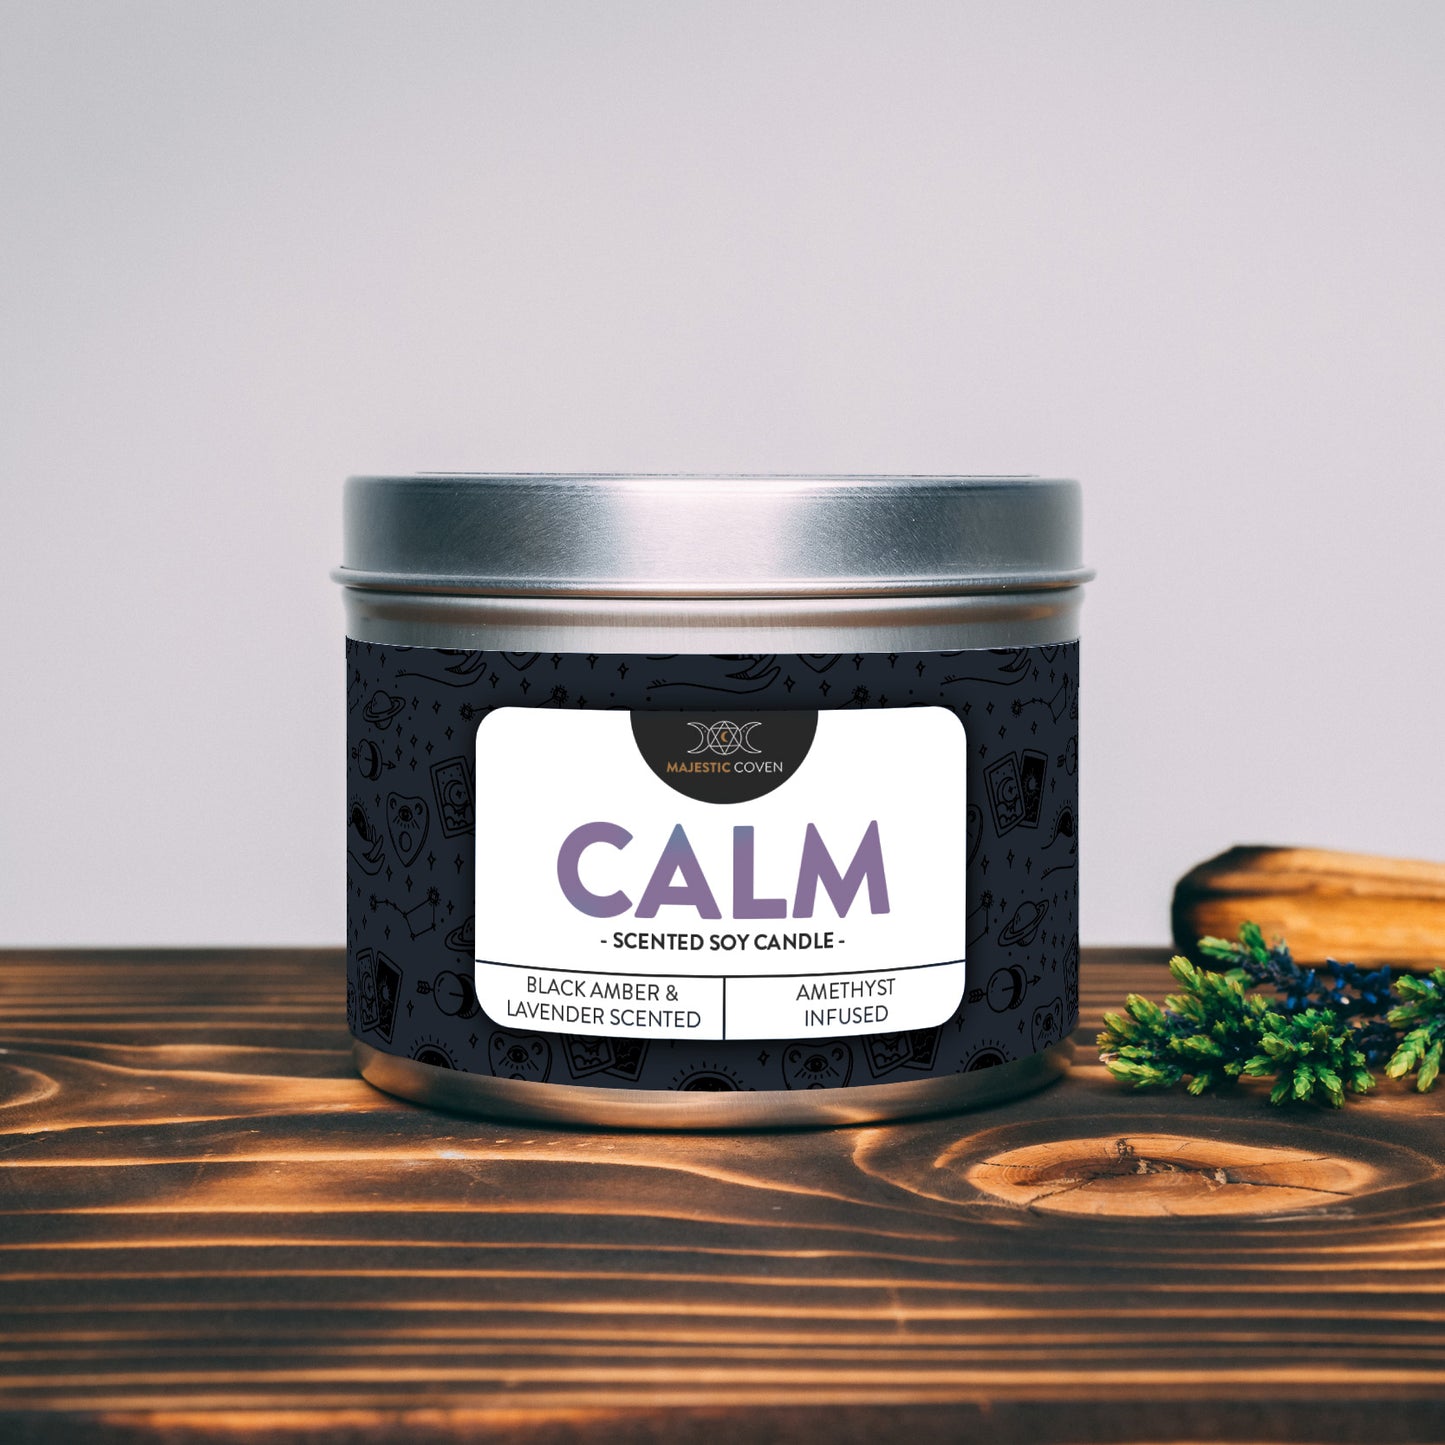 Calm - Amethyst Infused Crystal Soy Candle Majestic Coven